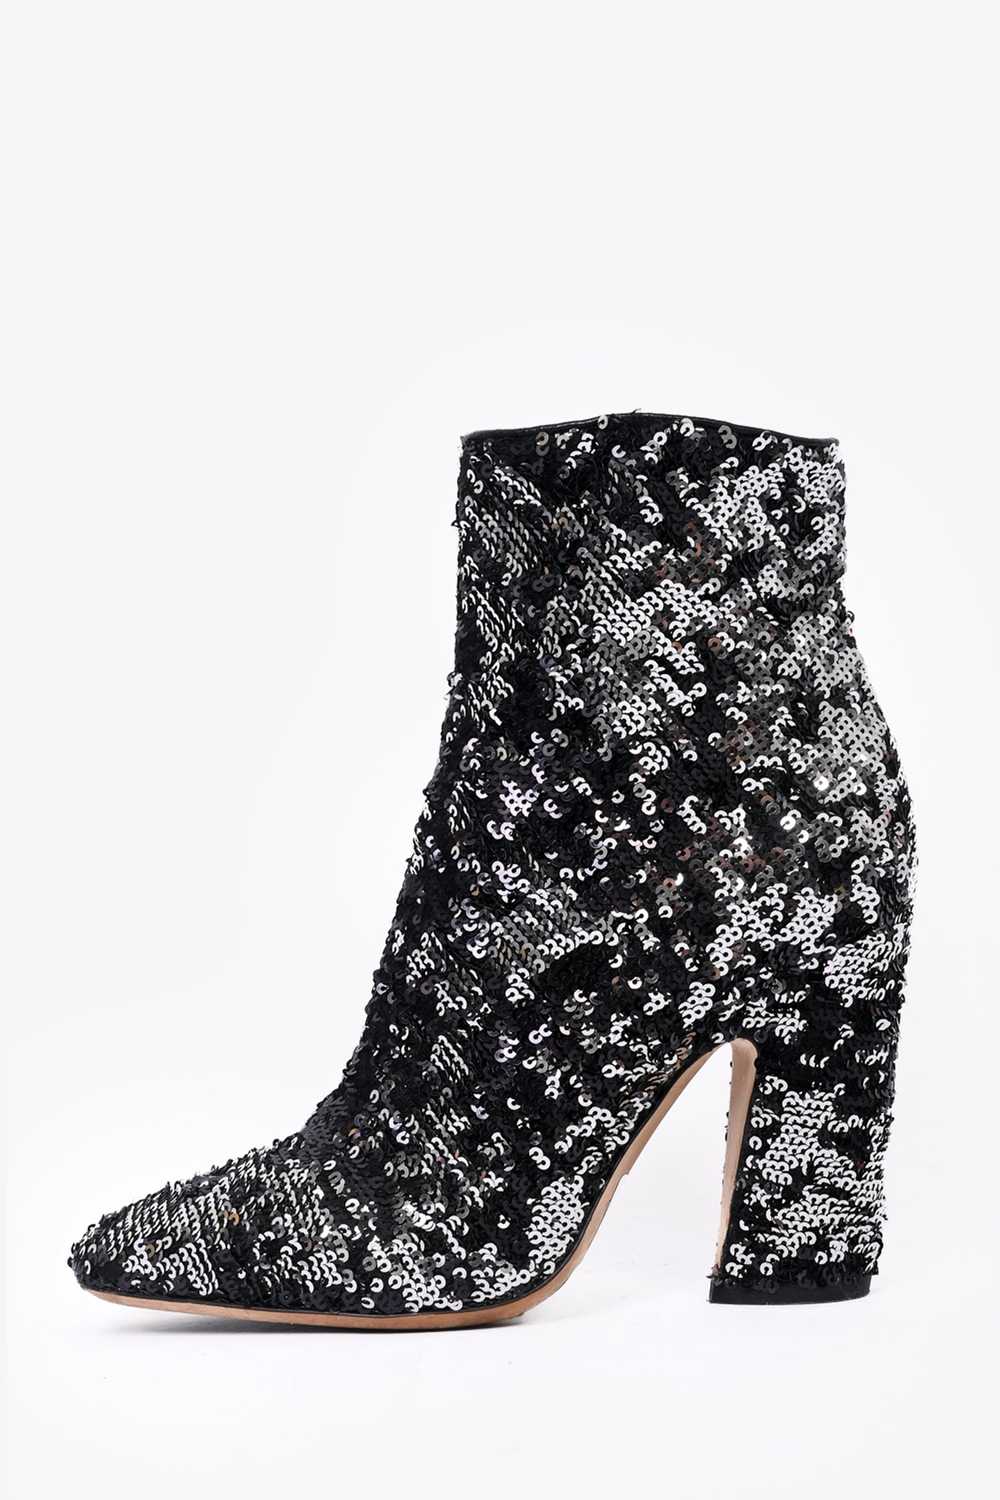 Jimmy Choo Black/Silver Sequin Heeled Boots Size … - image 5